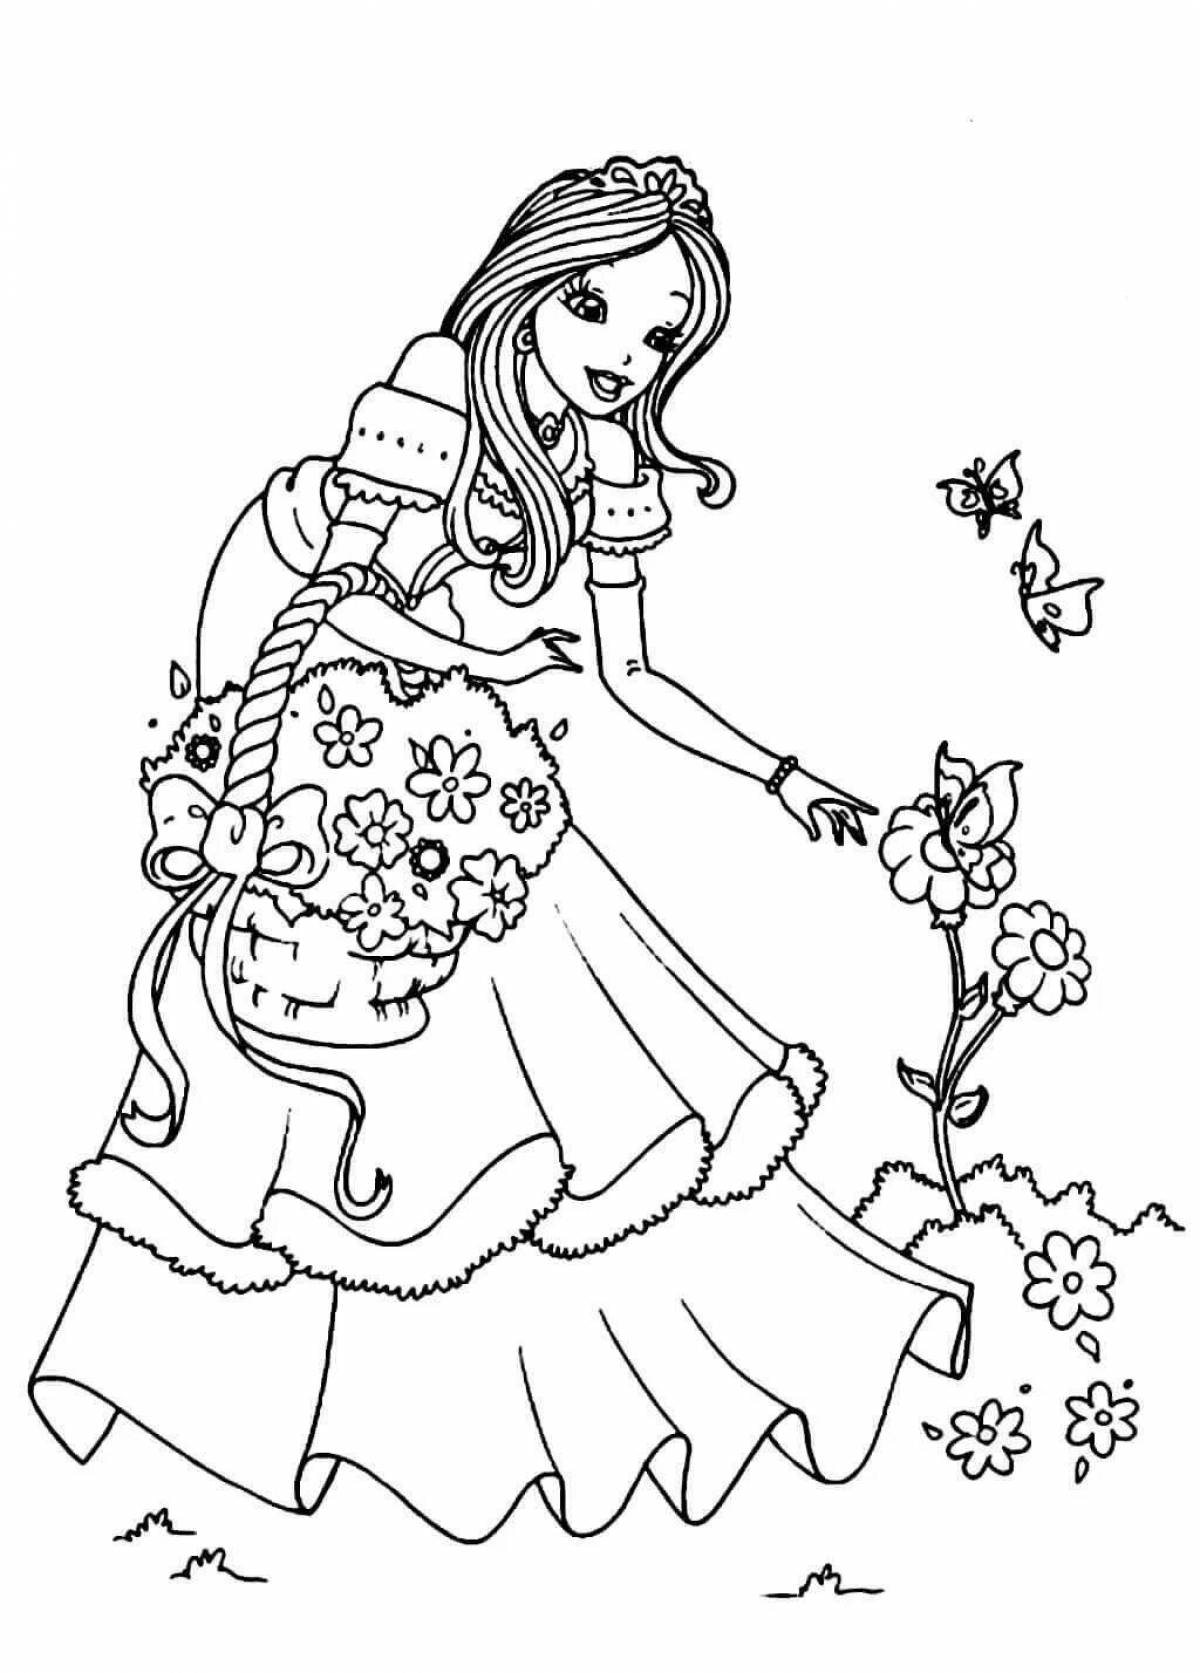 Delightful coloring book for girls 6-7 years old